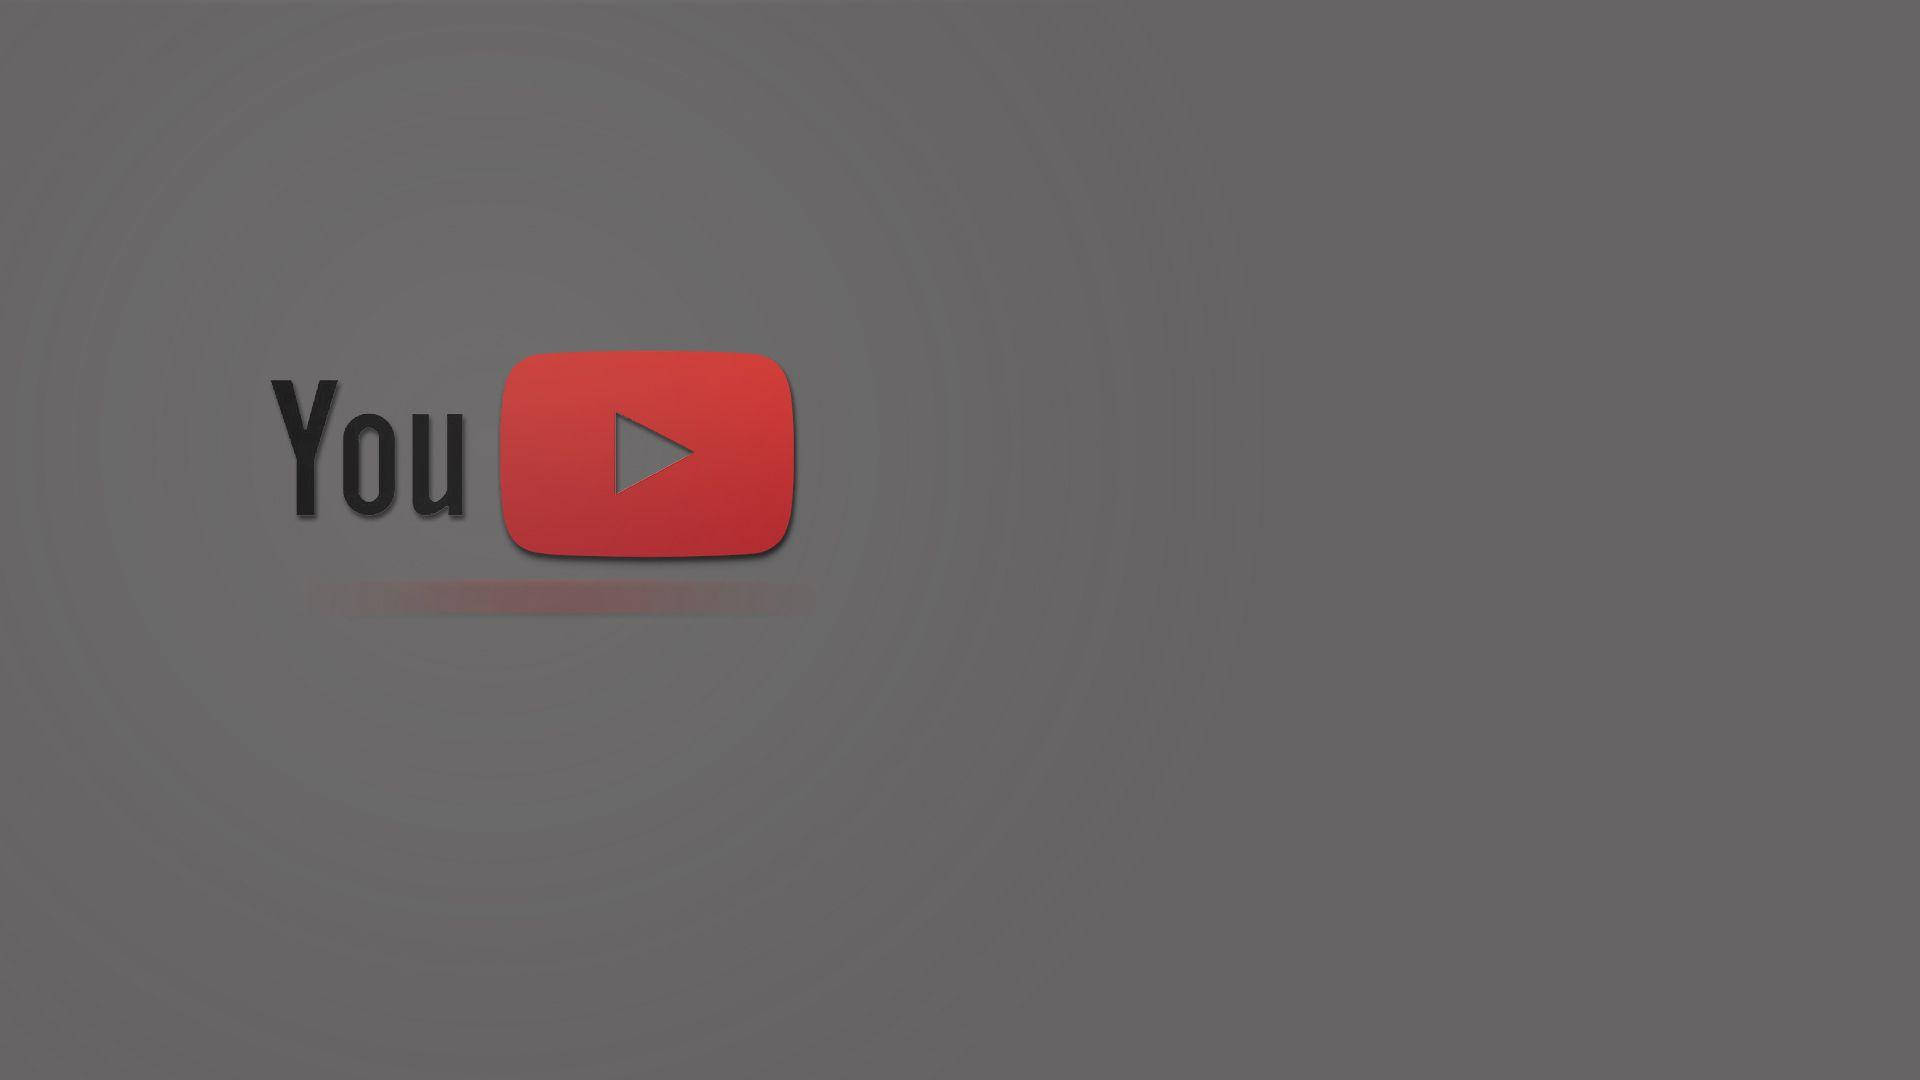 Aesthetic Youtube Red Play Button Logo